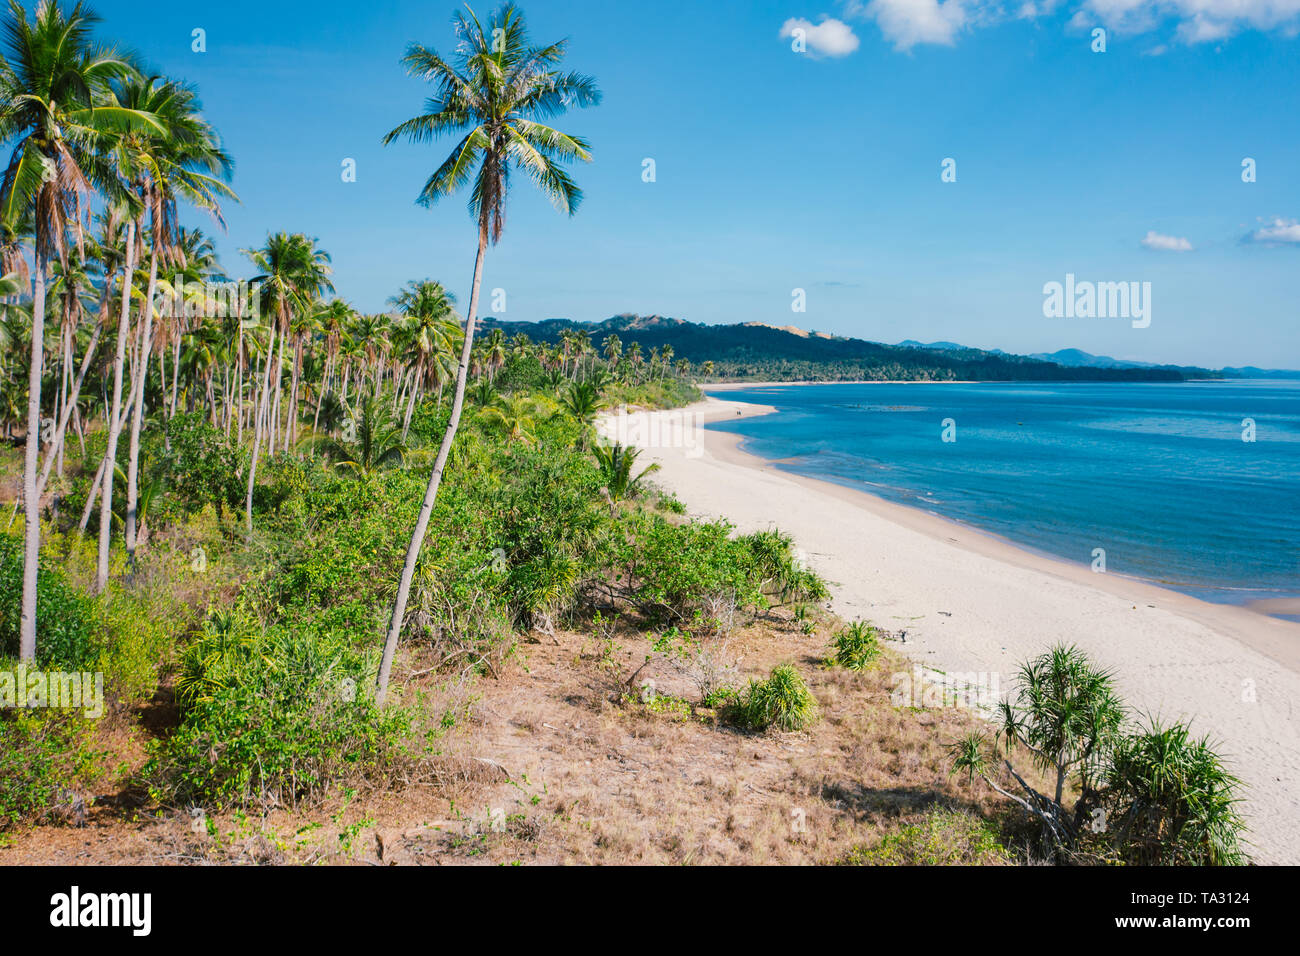 Amazing tropical beach with palm trees in Philippines Stock Photo